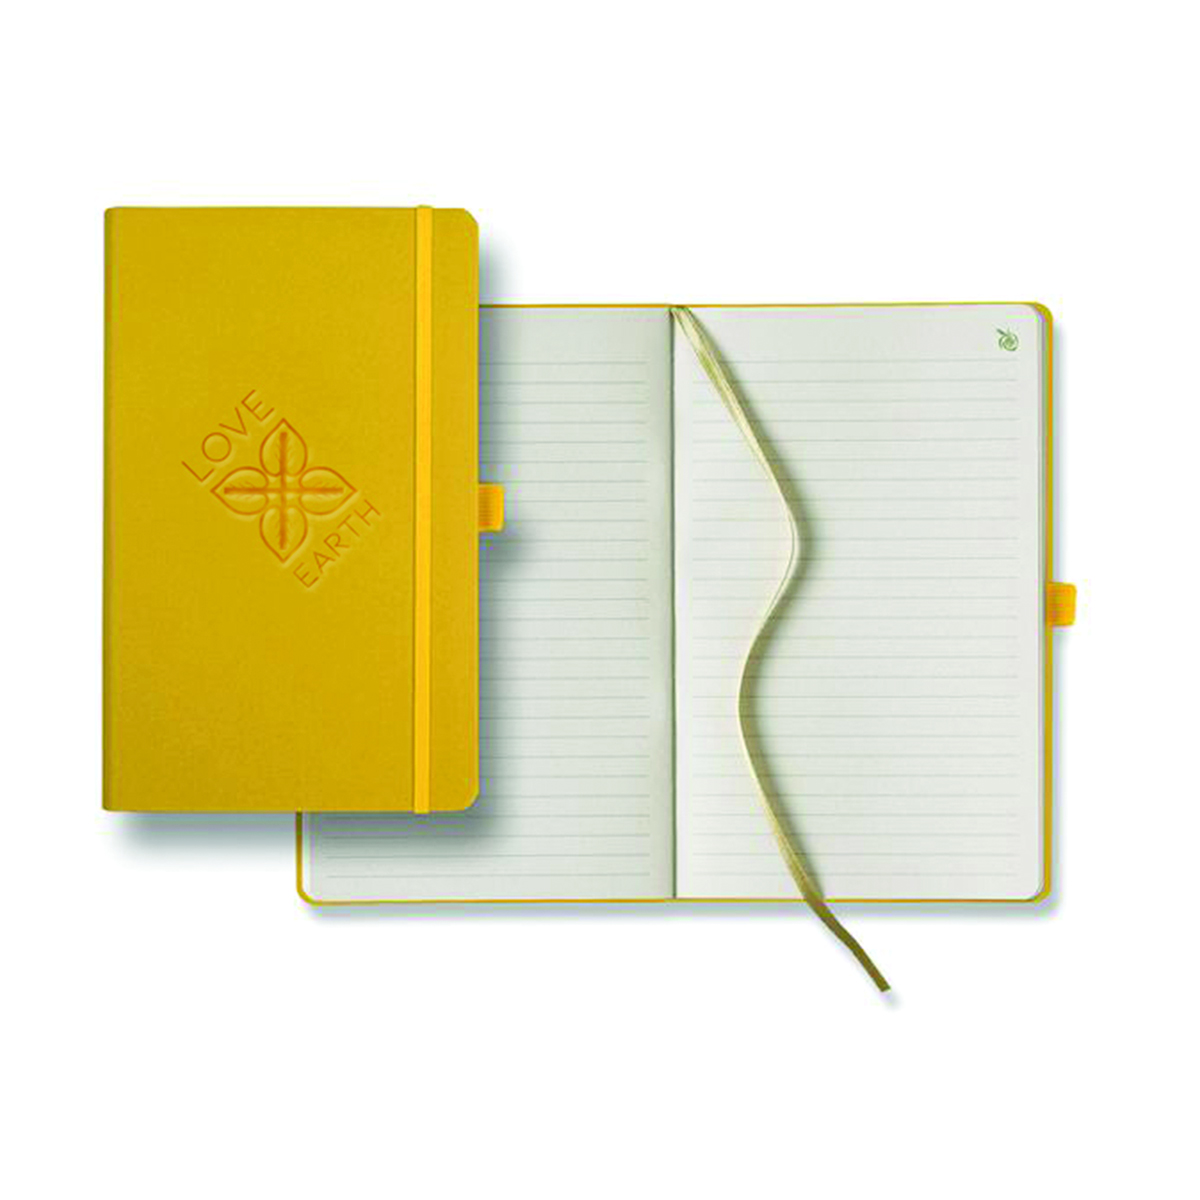 LOVE+EARTH STYLISH ECO JOURNAL MADE FROM APPLE PEEL